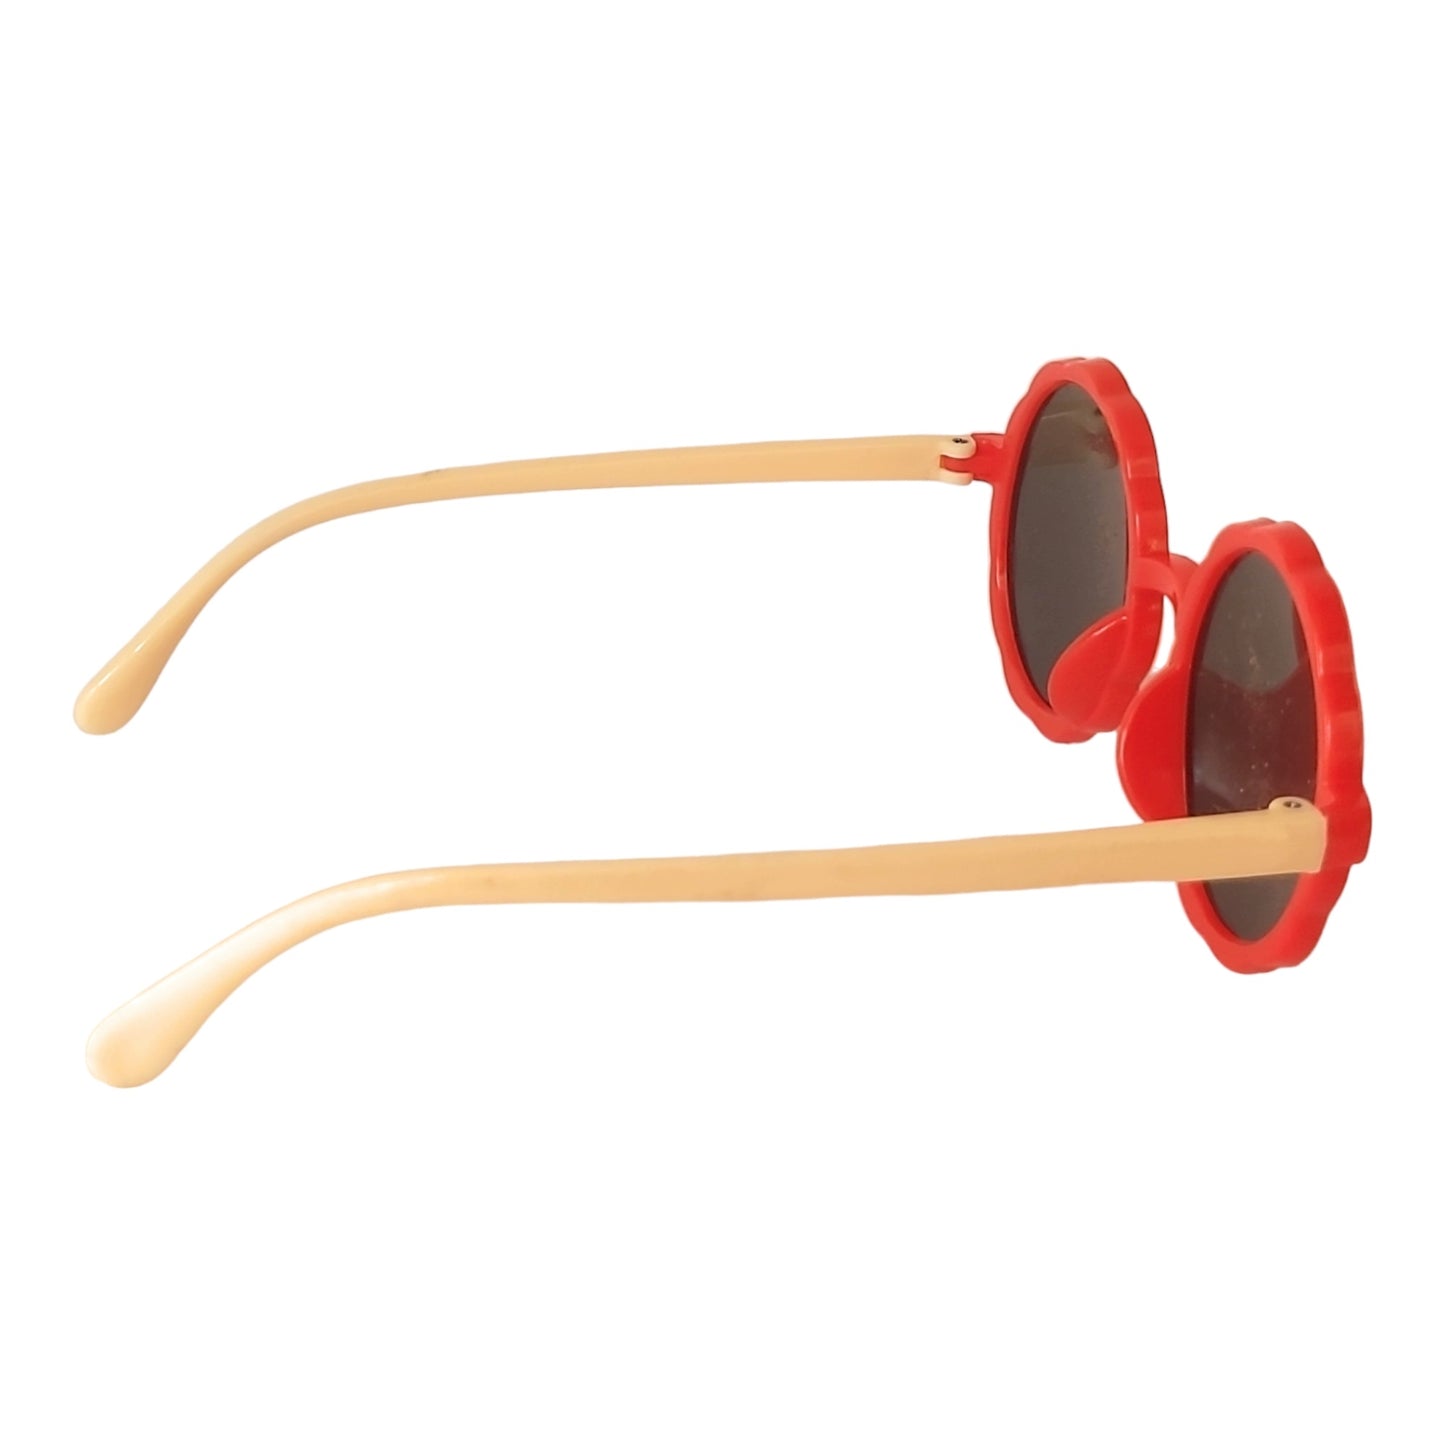 Round sunglasses for Kids ( 3yrs to 8yrs ) – affaires-2031-Red-White